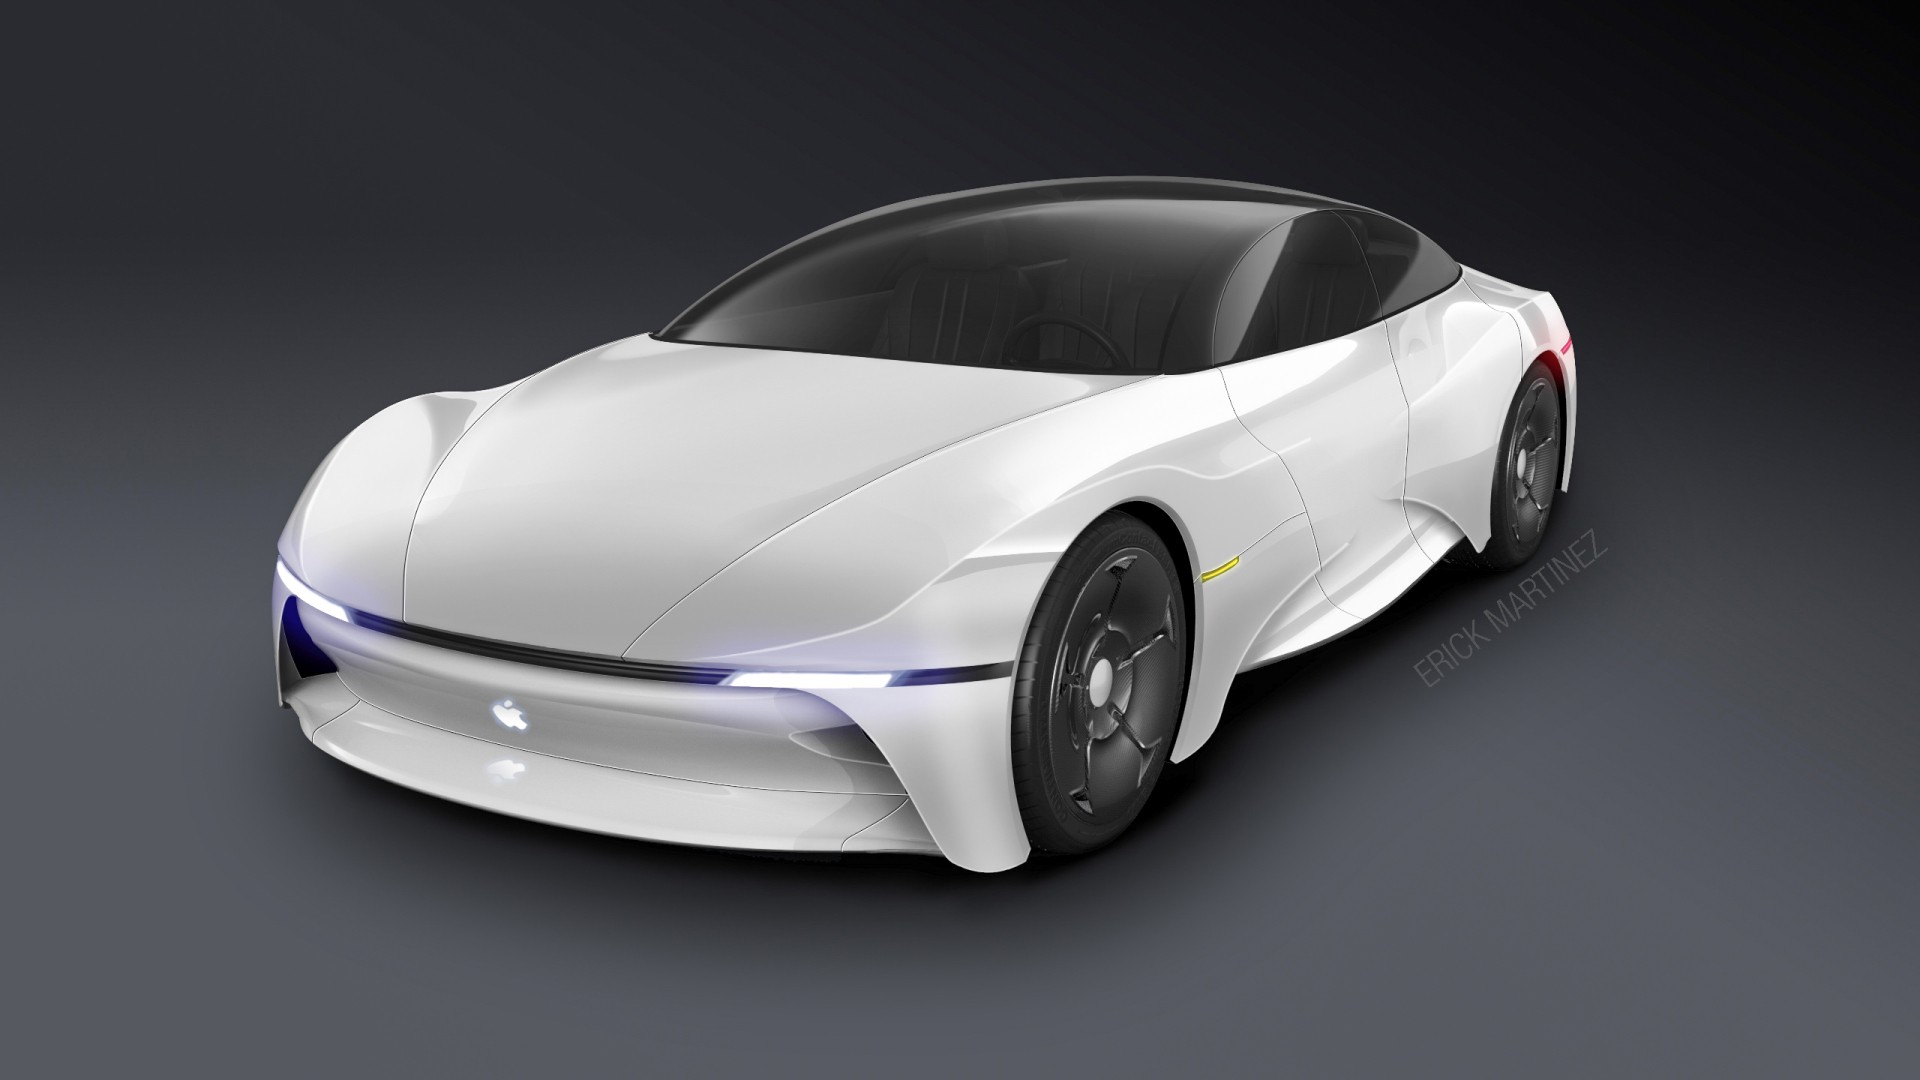 “Project Titan” Apple Car Now Expected To Launch In 20252027 at the